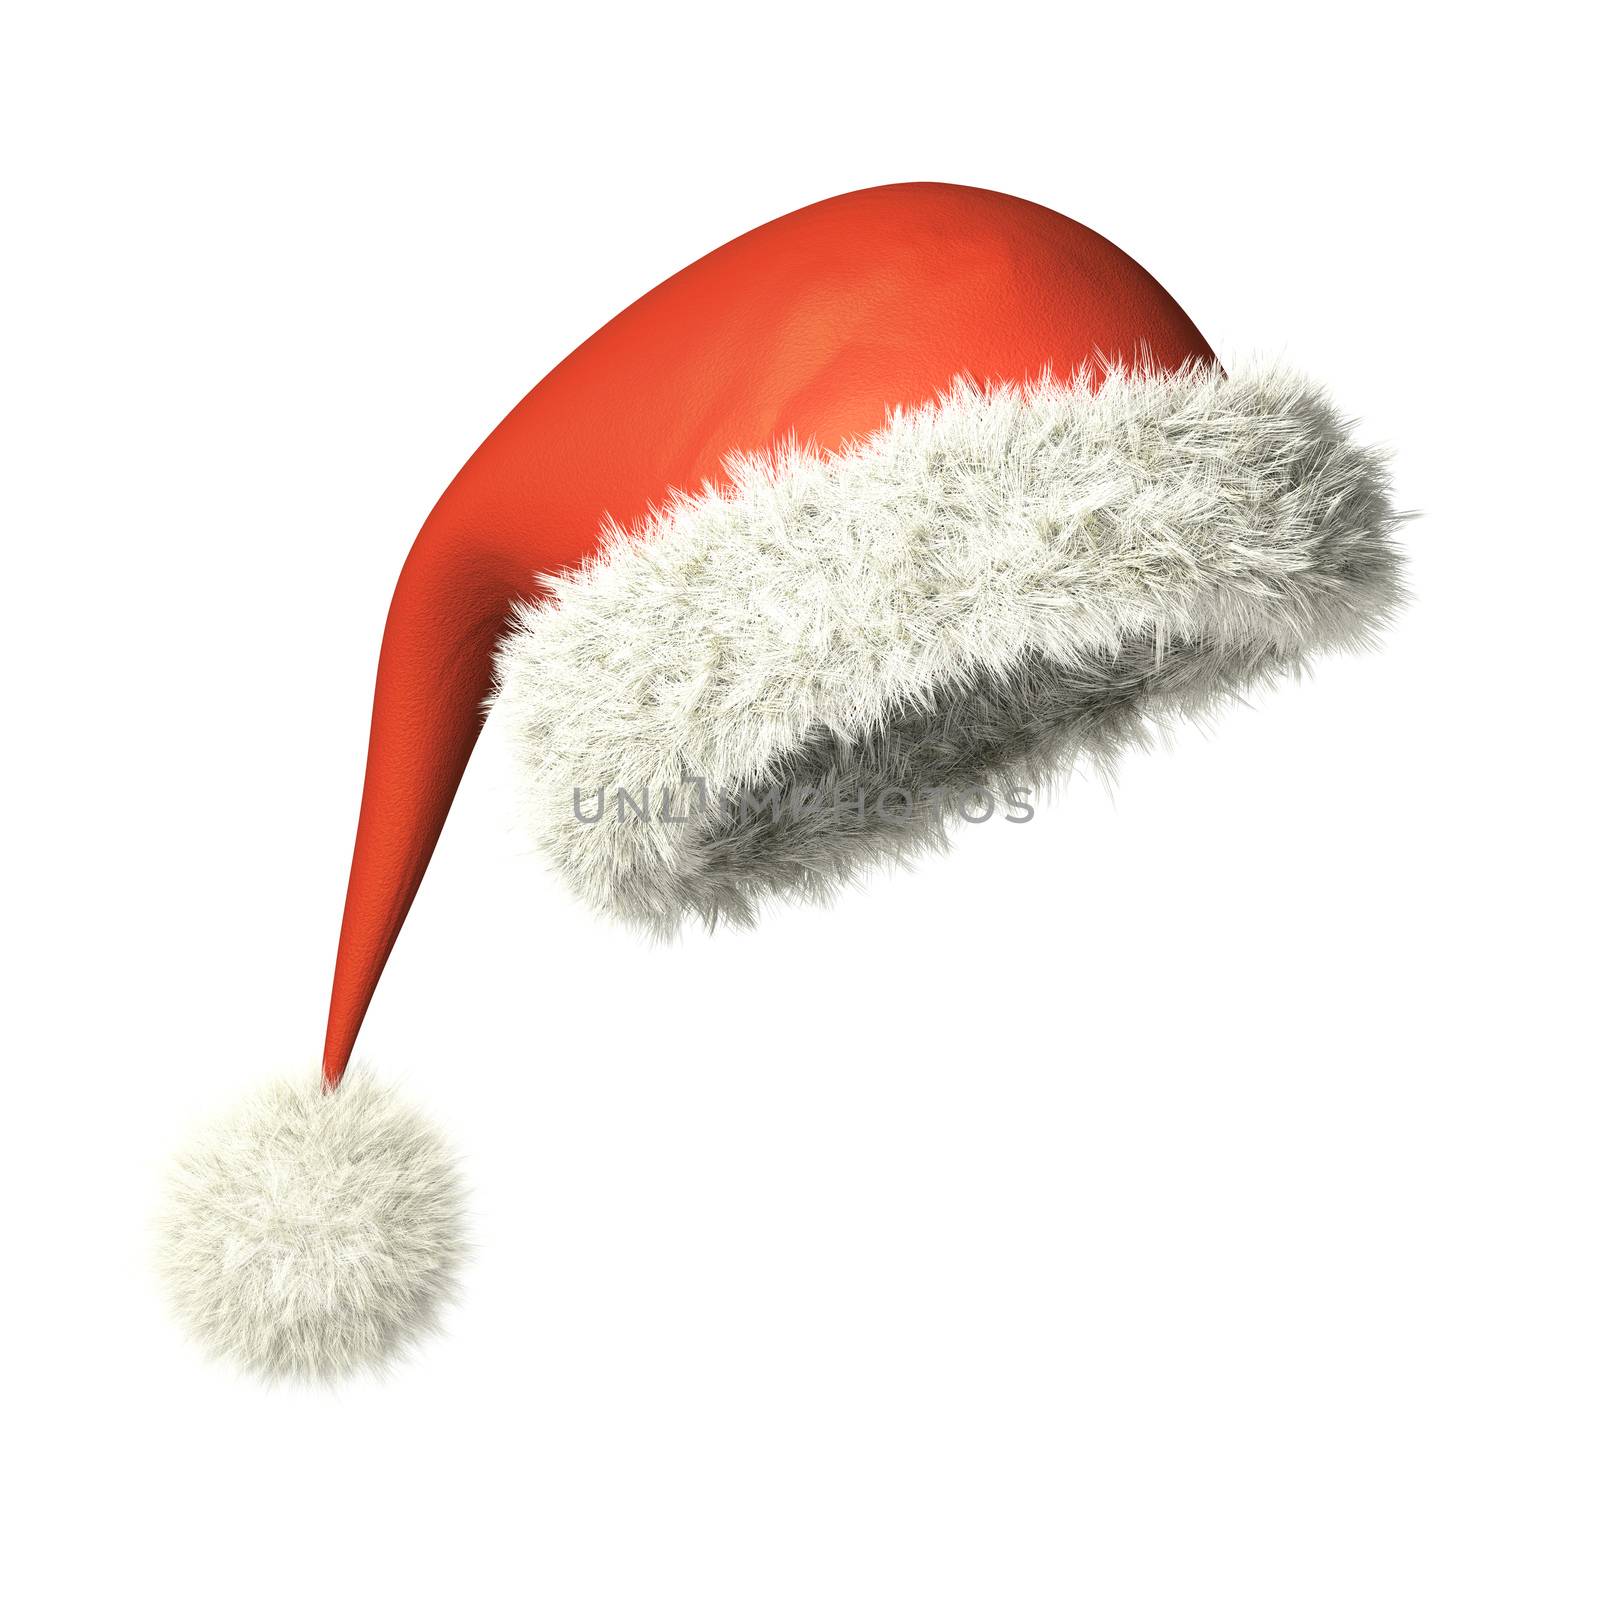 3d rendering of a red Santa Claus hat